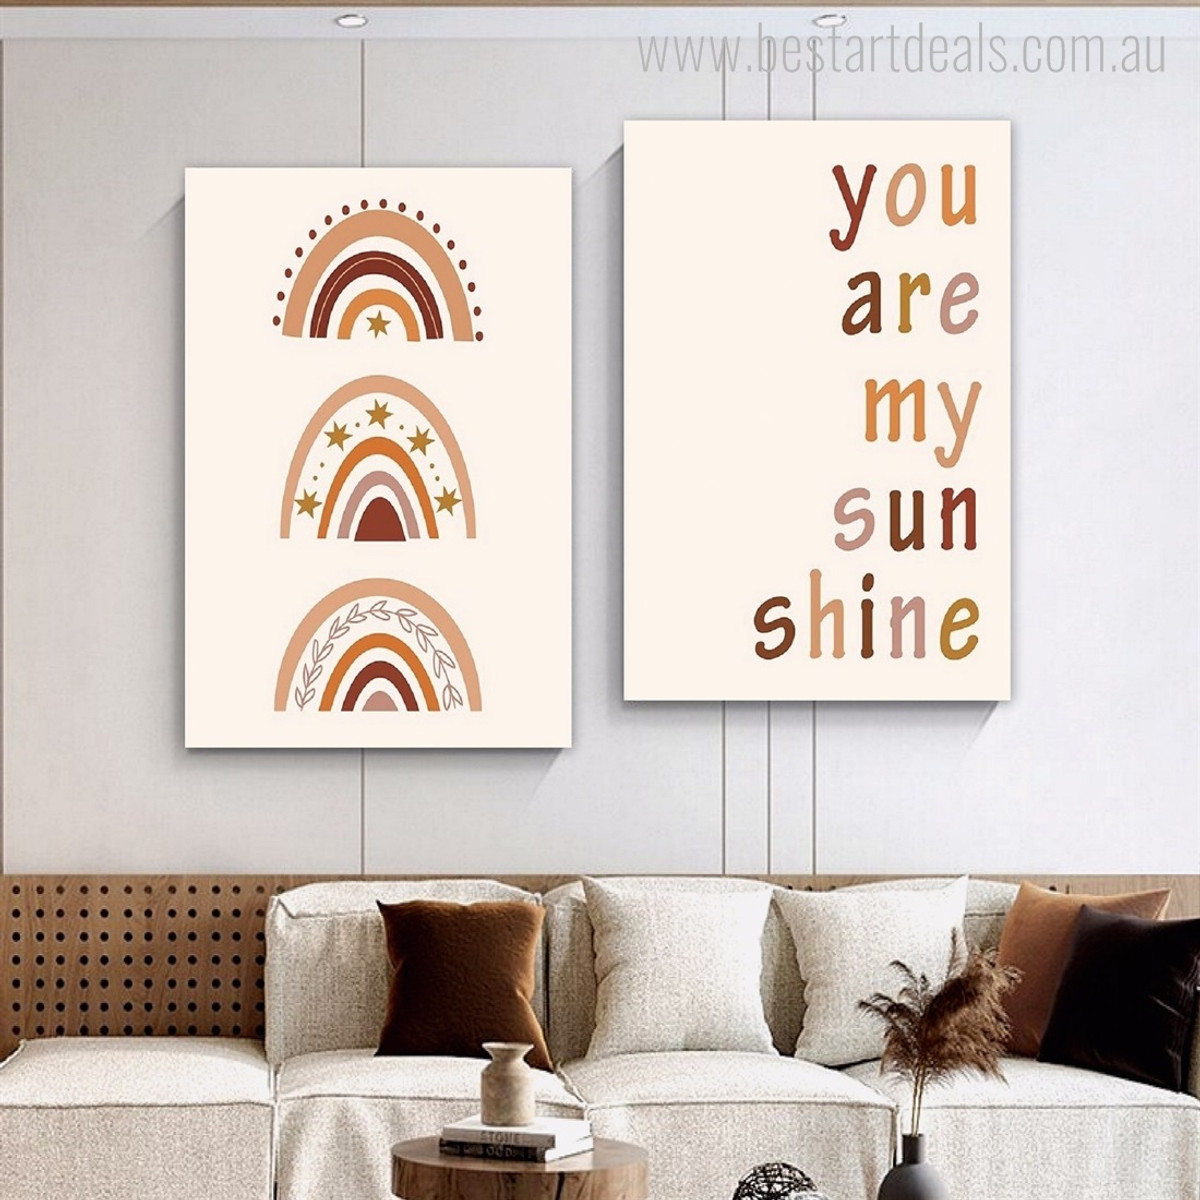 You Are My Sunshine Typography 2 Panel Nursery Wall Art Photograph Minimalist Stretched Canvas Print for Room Decor